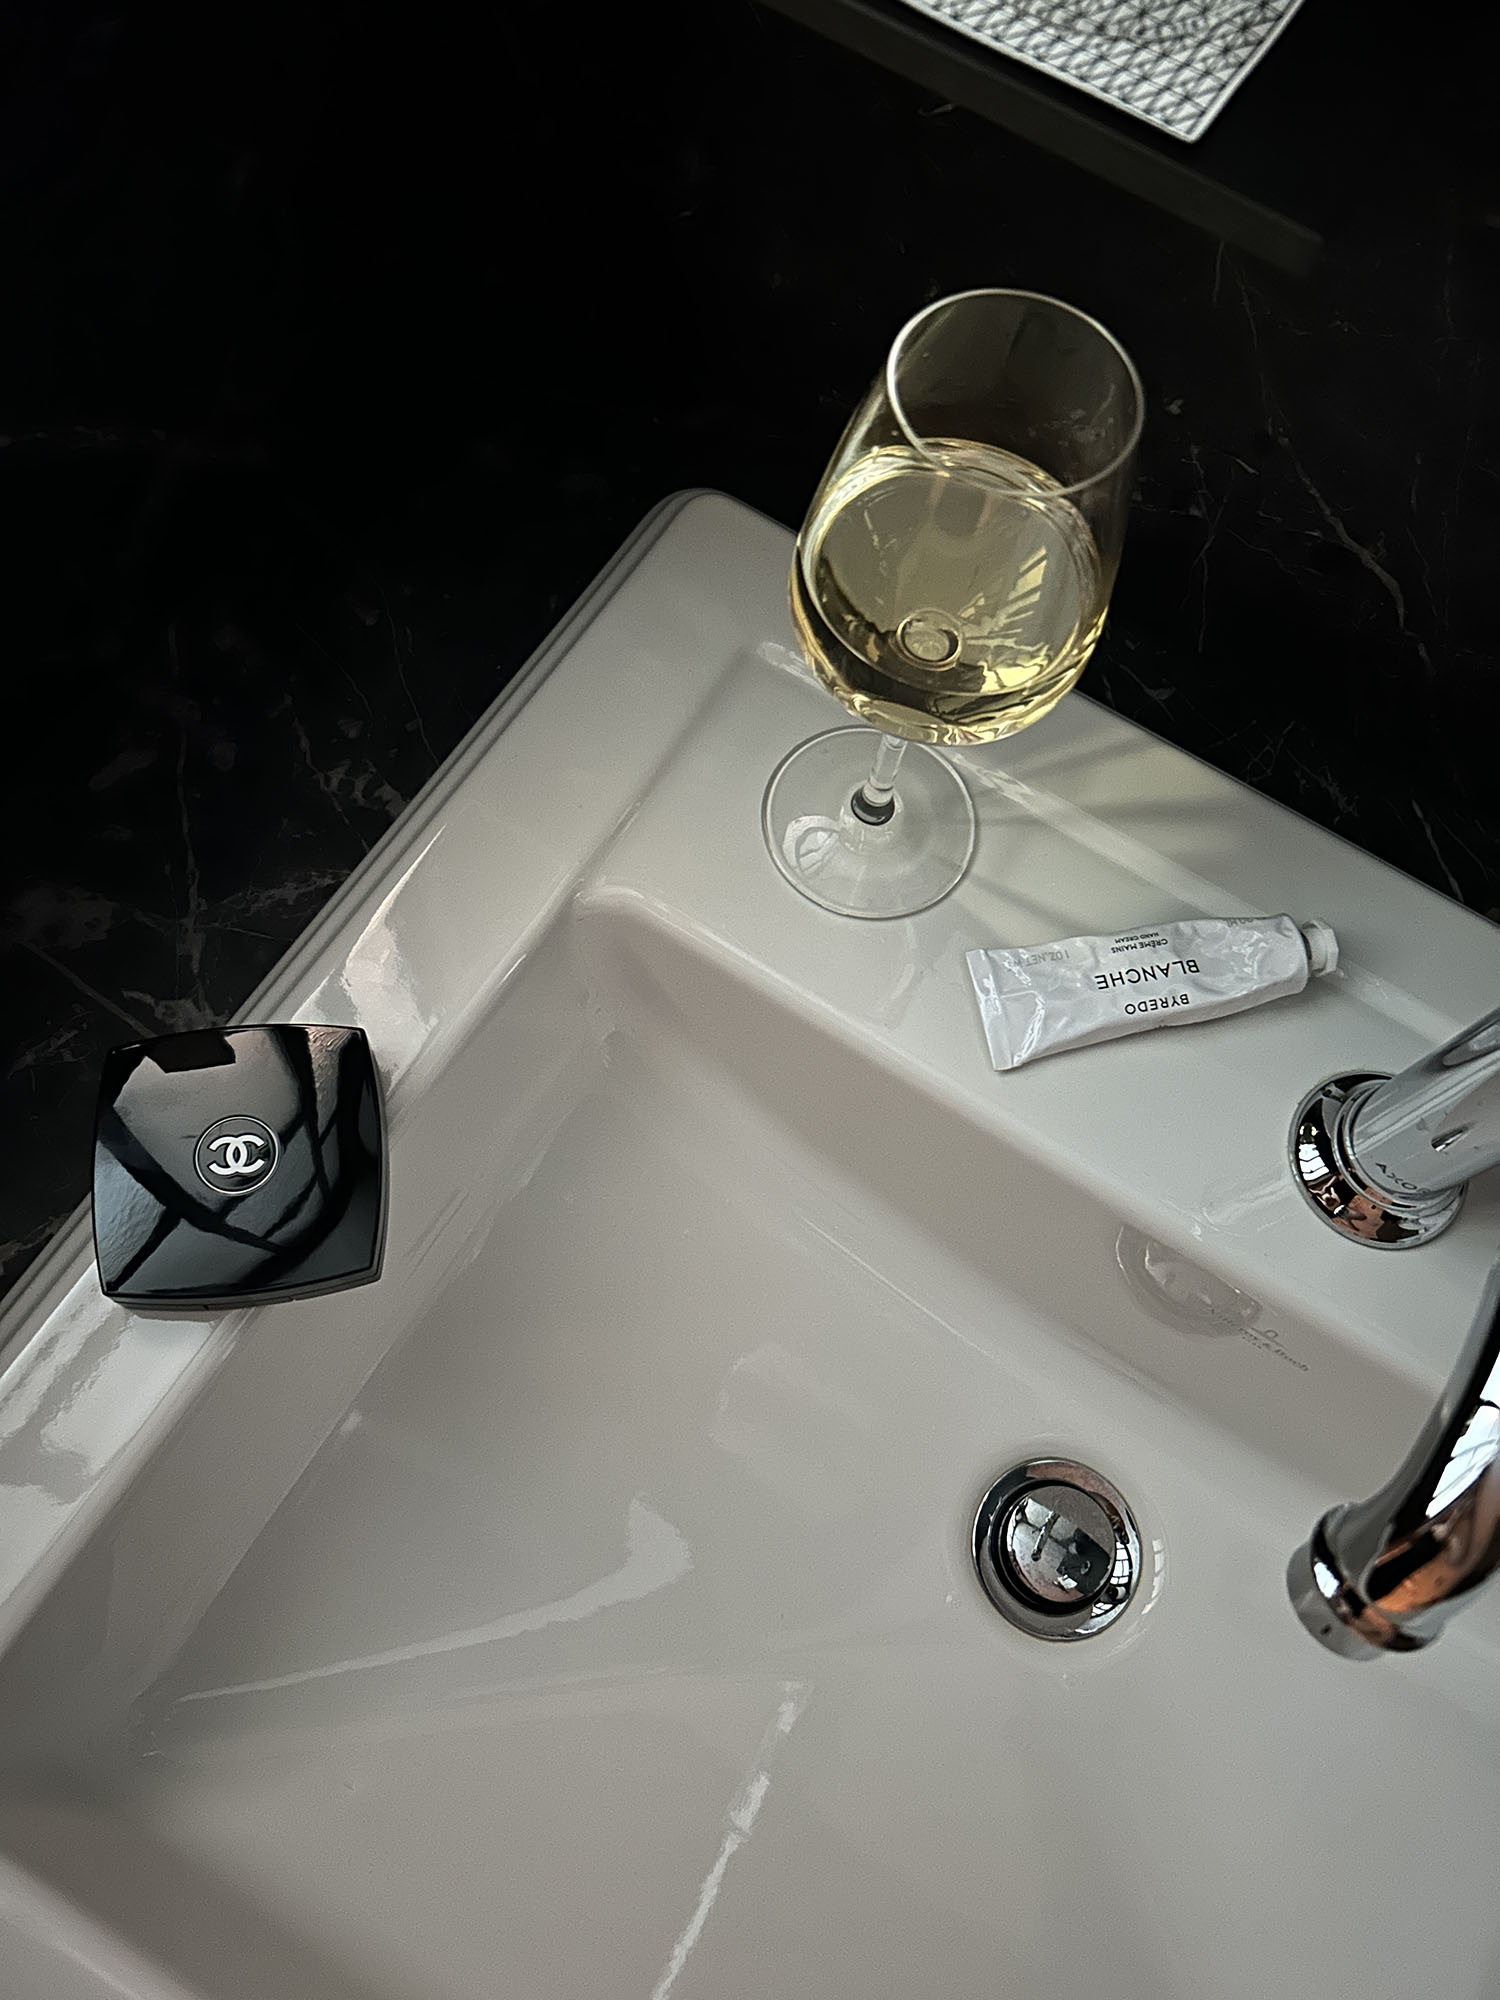 Coco & Voltaire - Chanel compact, Byredo hand cream and white wine by a sink